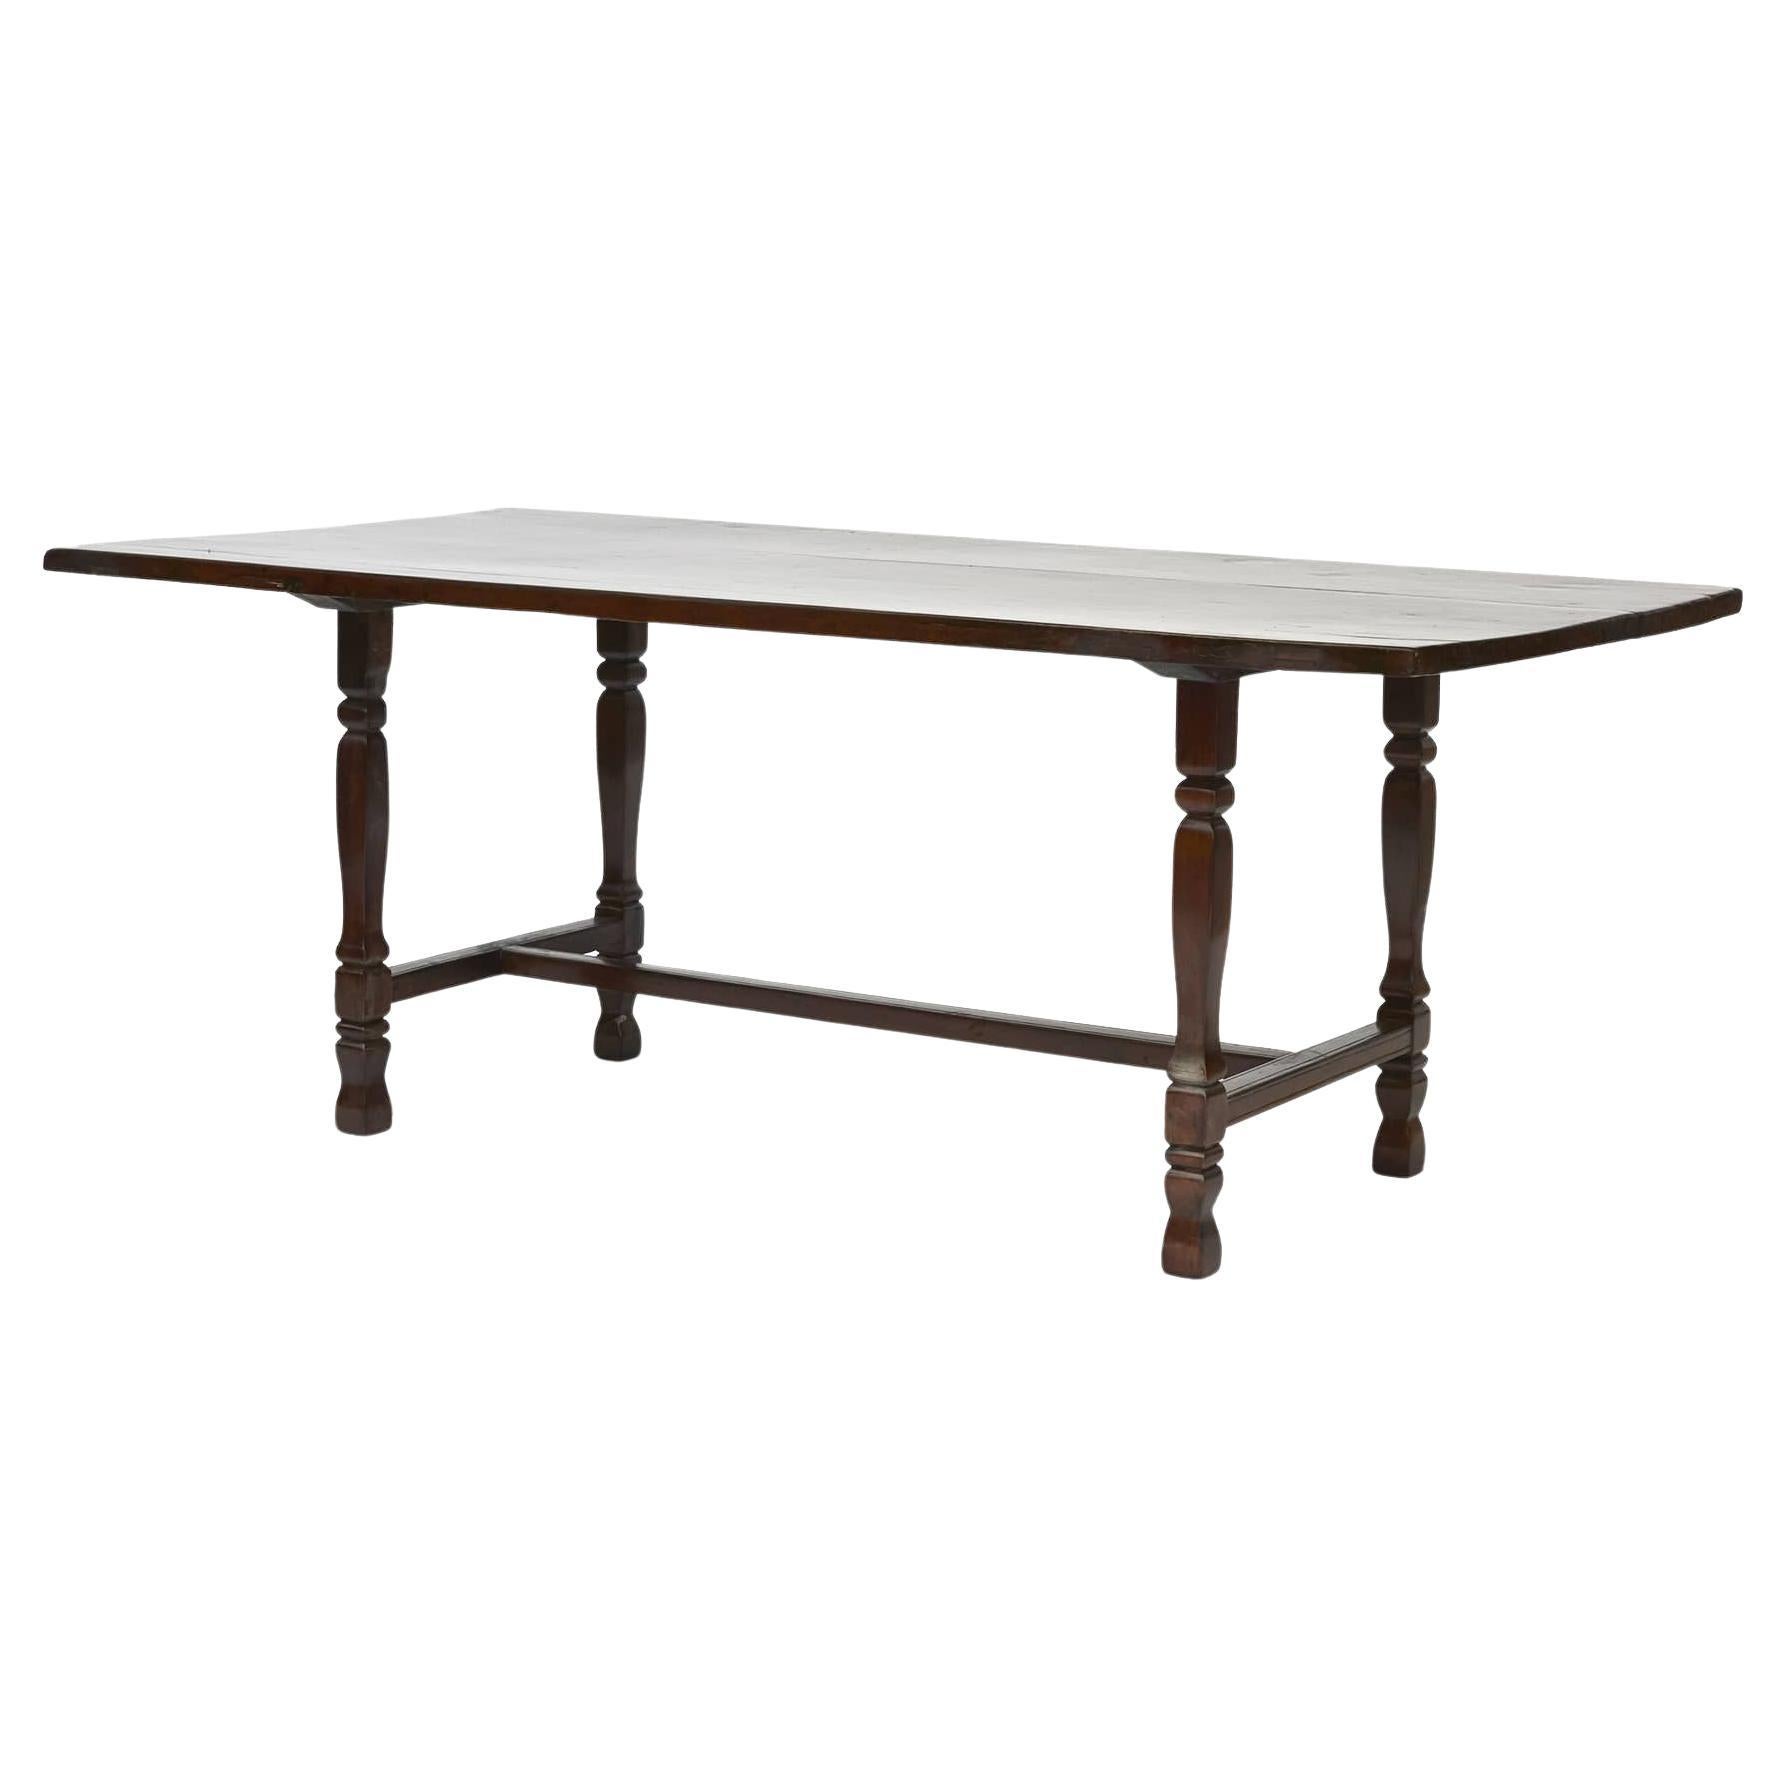 Dinning Table, Spanish Colony 1860 - 1880